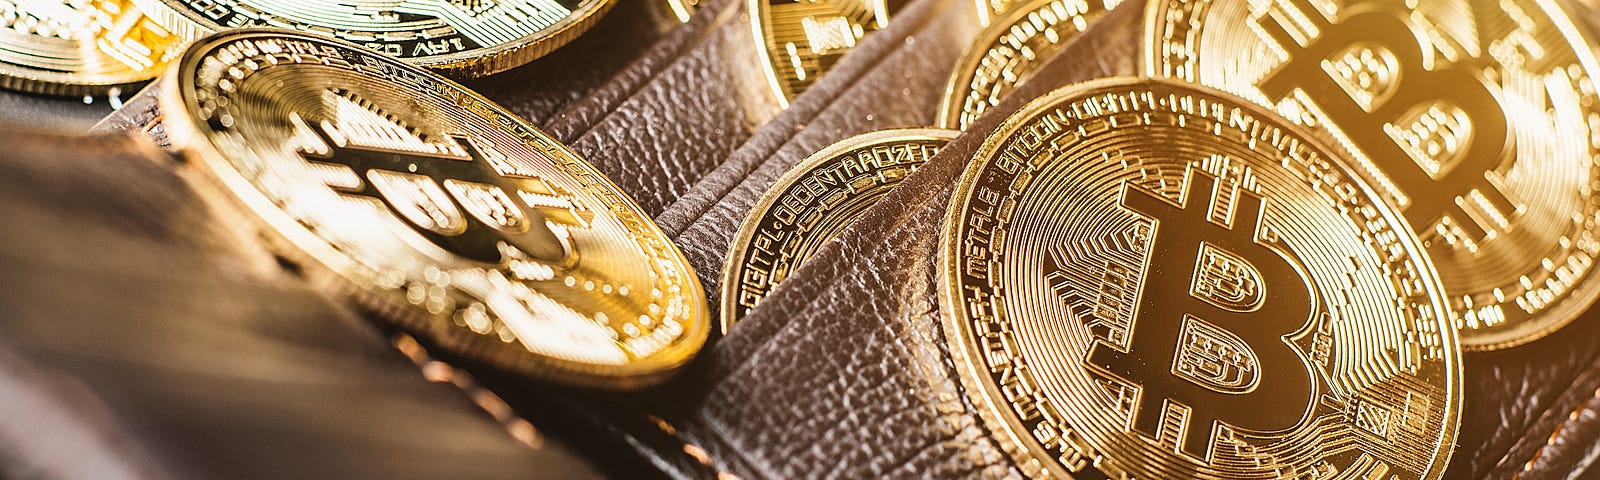 Bitcoins in a wallet, from Shutterstock.